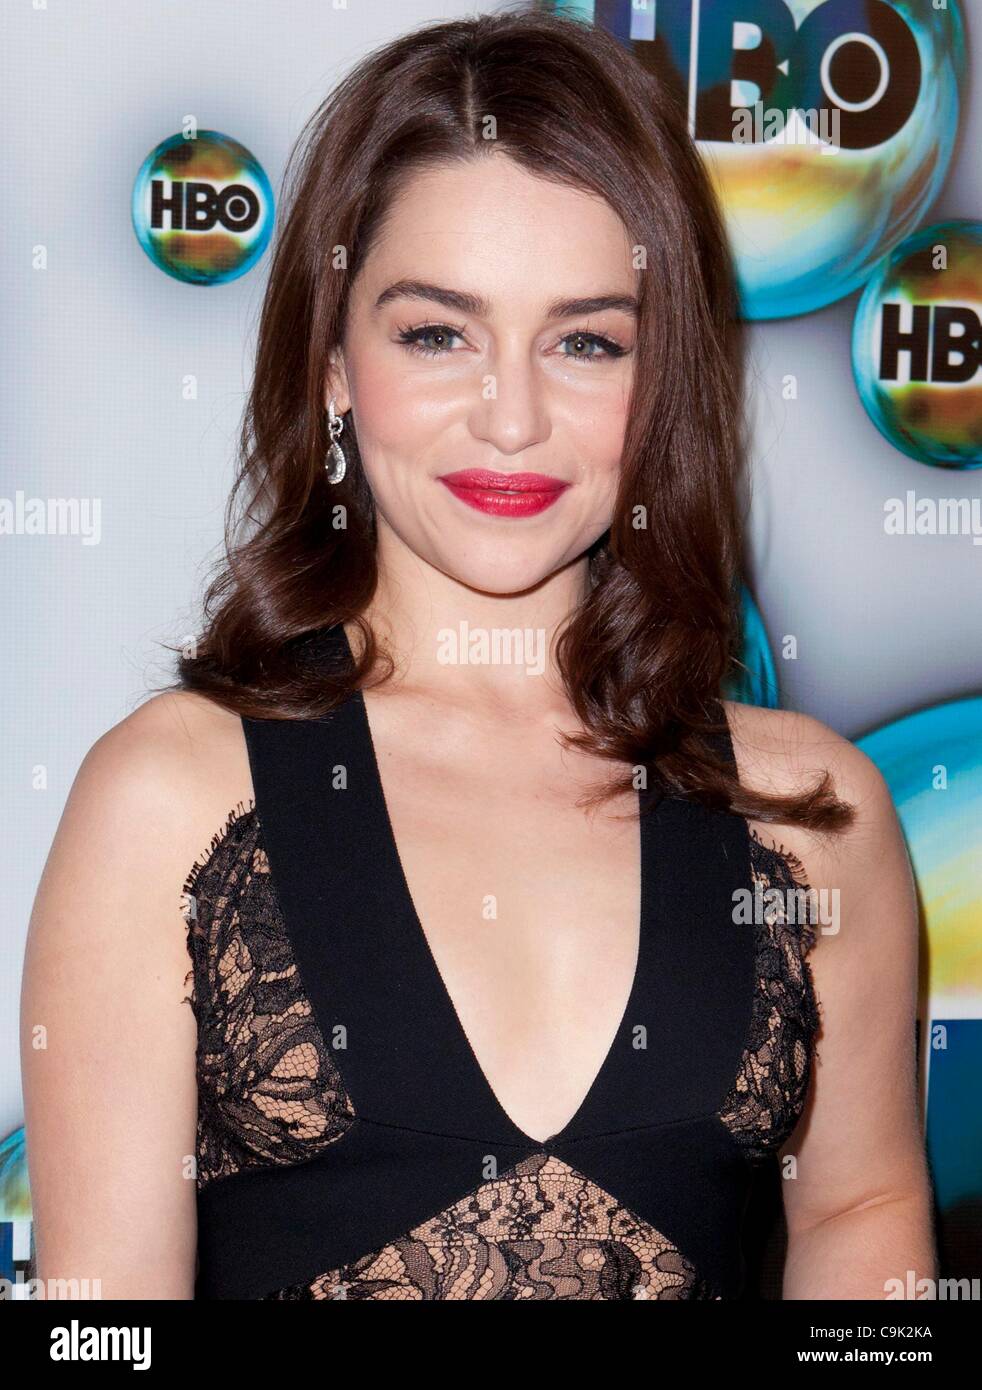 Emilia Clarke at arrivals for HBO Golden Globes Awards After-Party, Circa  55 Restaurant at the Beverly Hilton, Los Angeles, CA January 15, 2012.  Photo By: Emiley Schweich/Everett Collection Stock Photo - Alamy